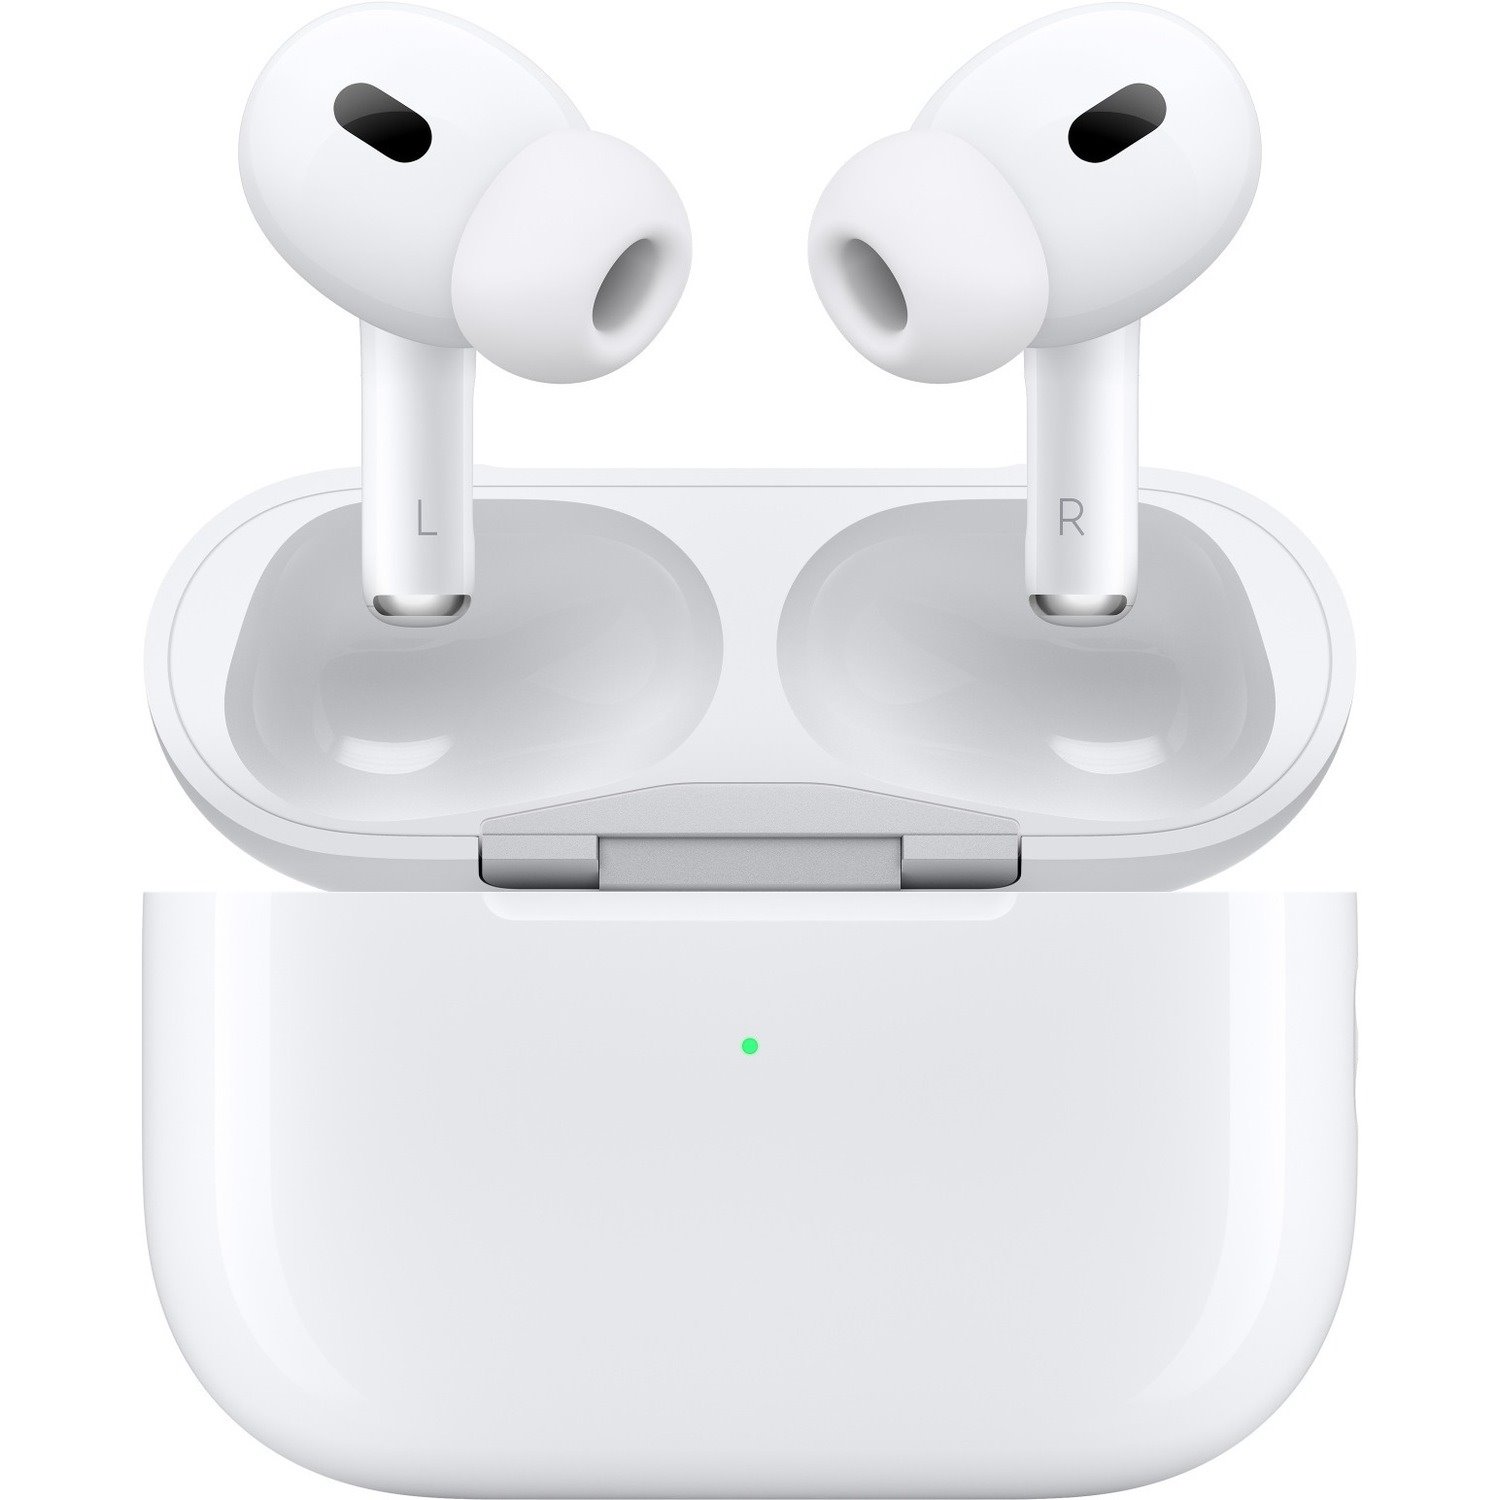 Apple AirPods Pro Wireless Earbud Stereo Earset - White